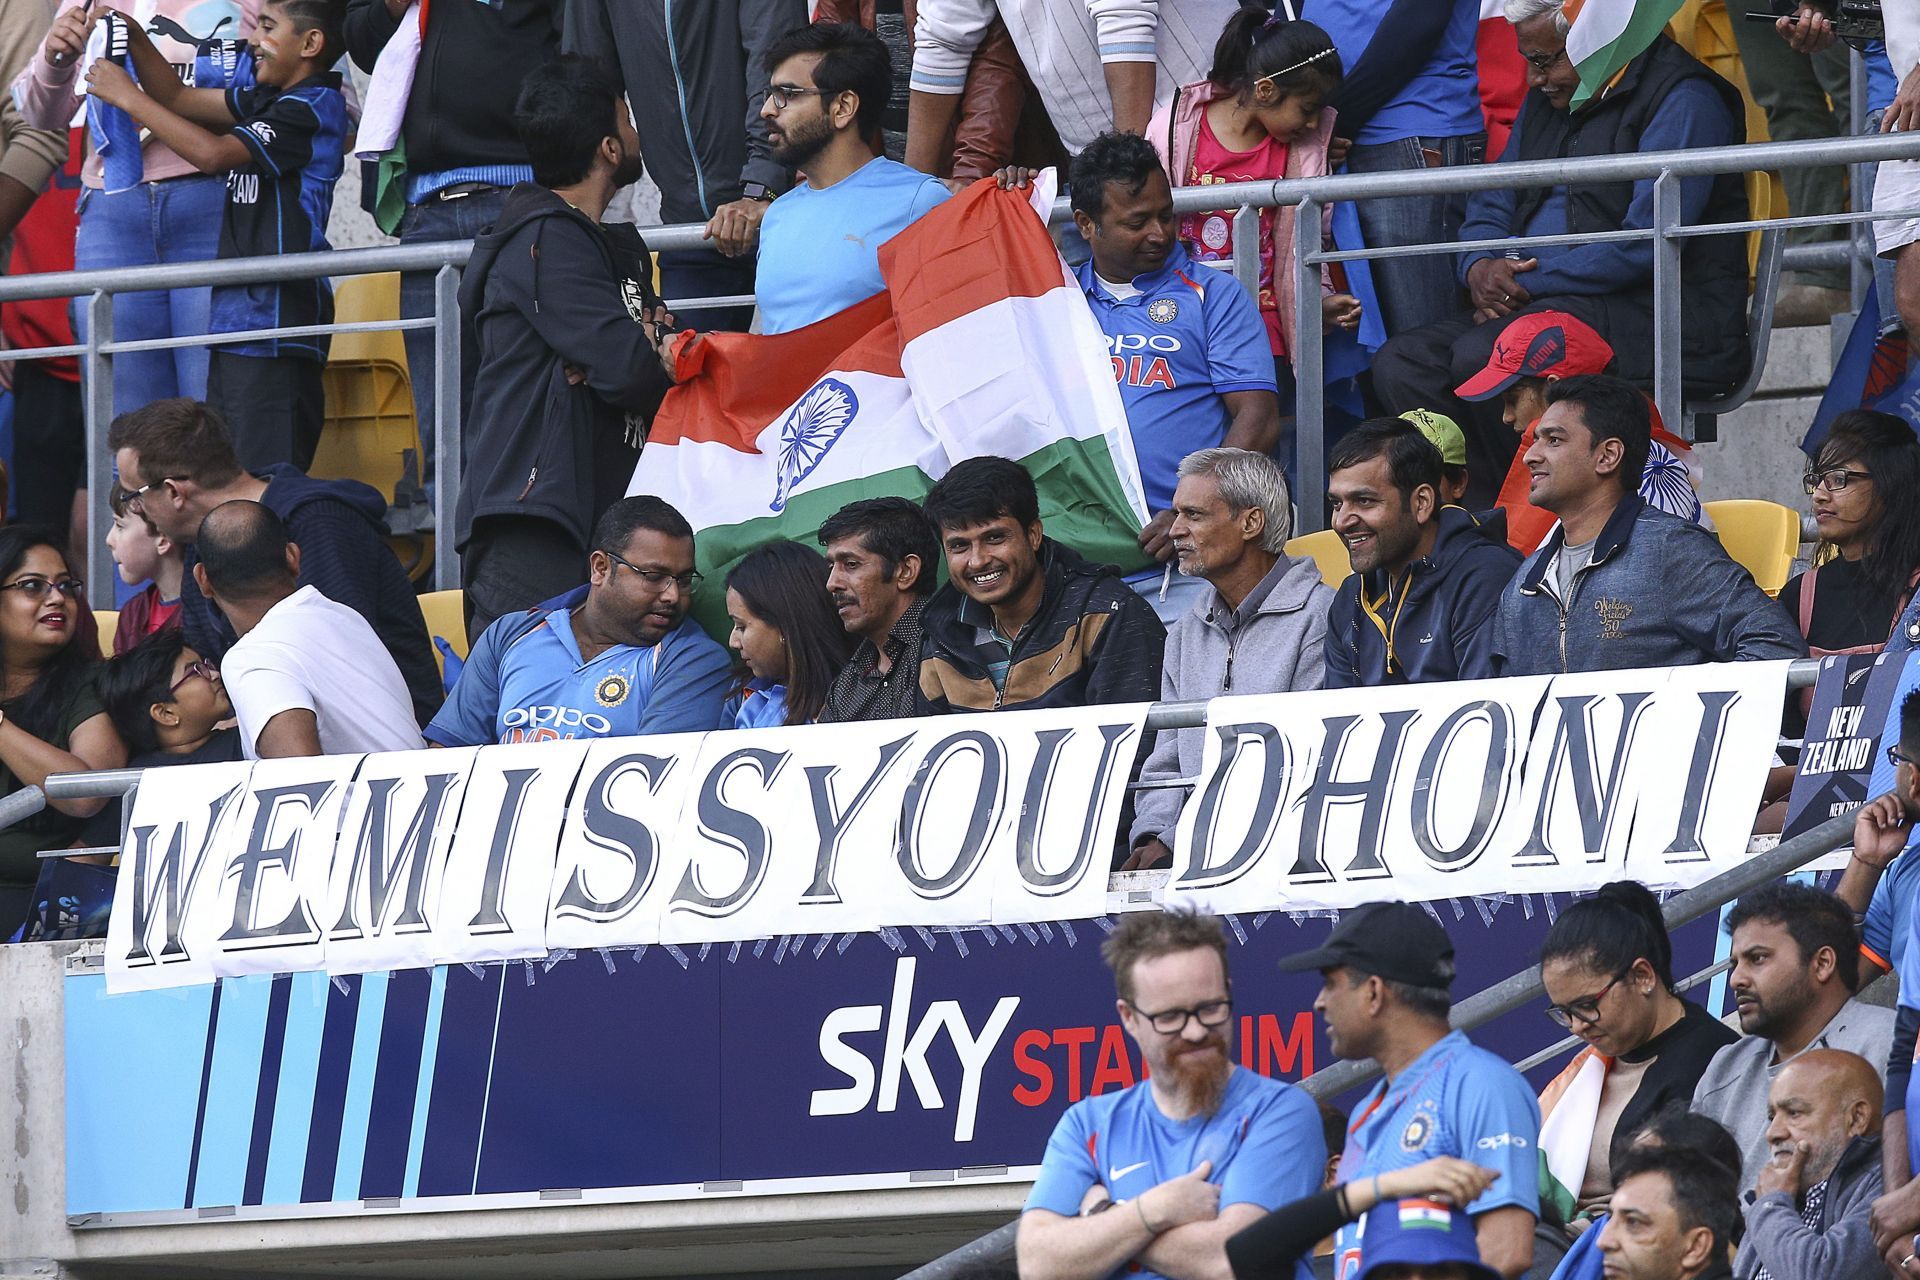 It is a common sight to see Indian fans with &quot;We Miss You Dhoni&quot; posters at stadiums (Image: Getty).